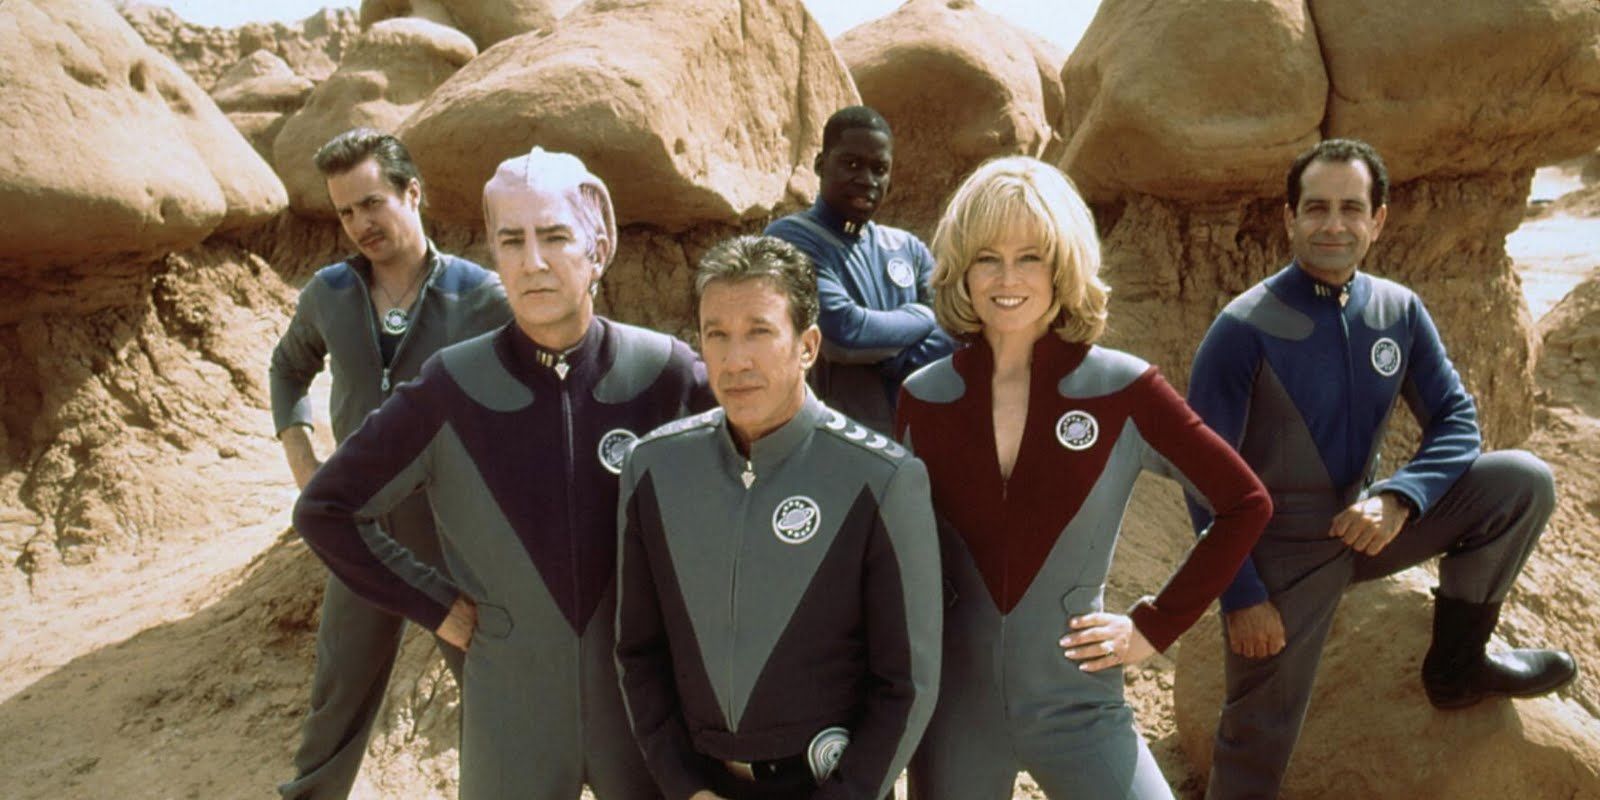 Star Trek Finally Does Its Own Version Of Galaxy Quest To Honor TOS